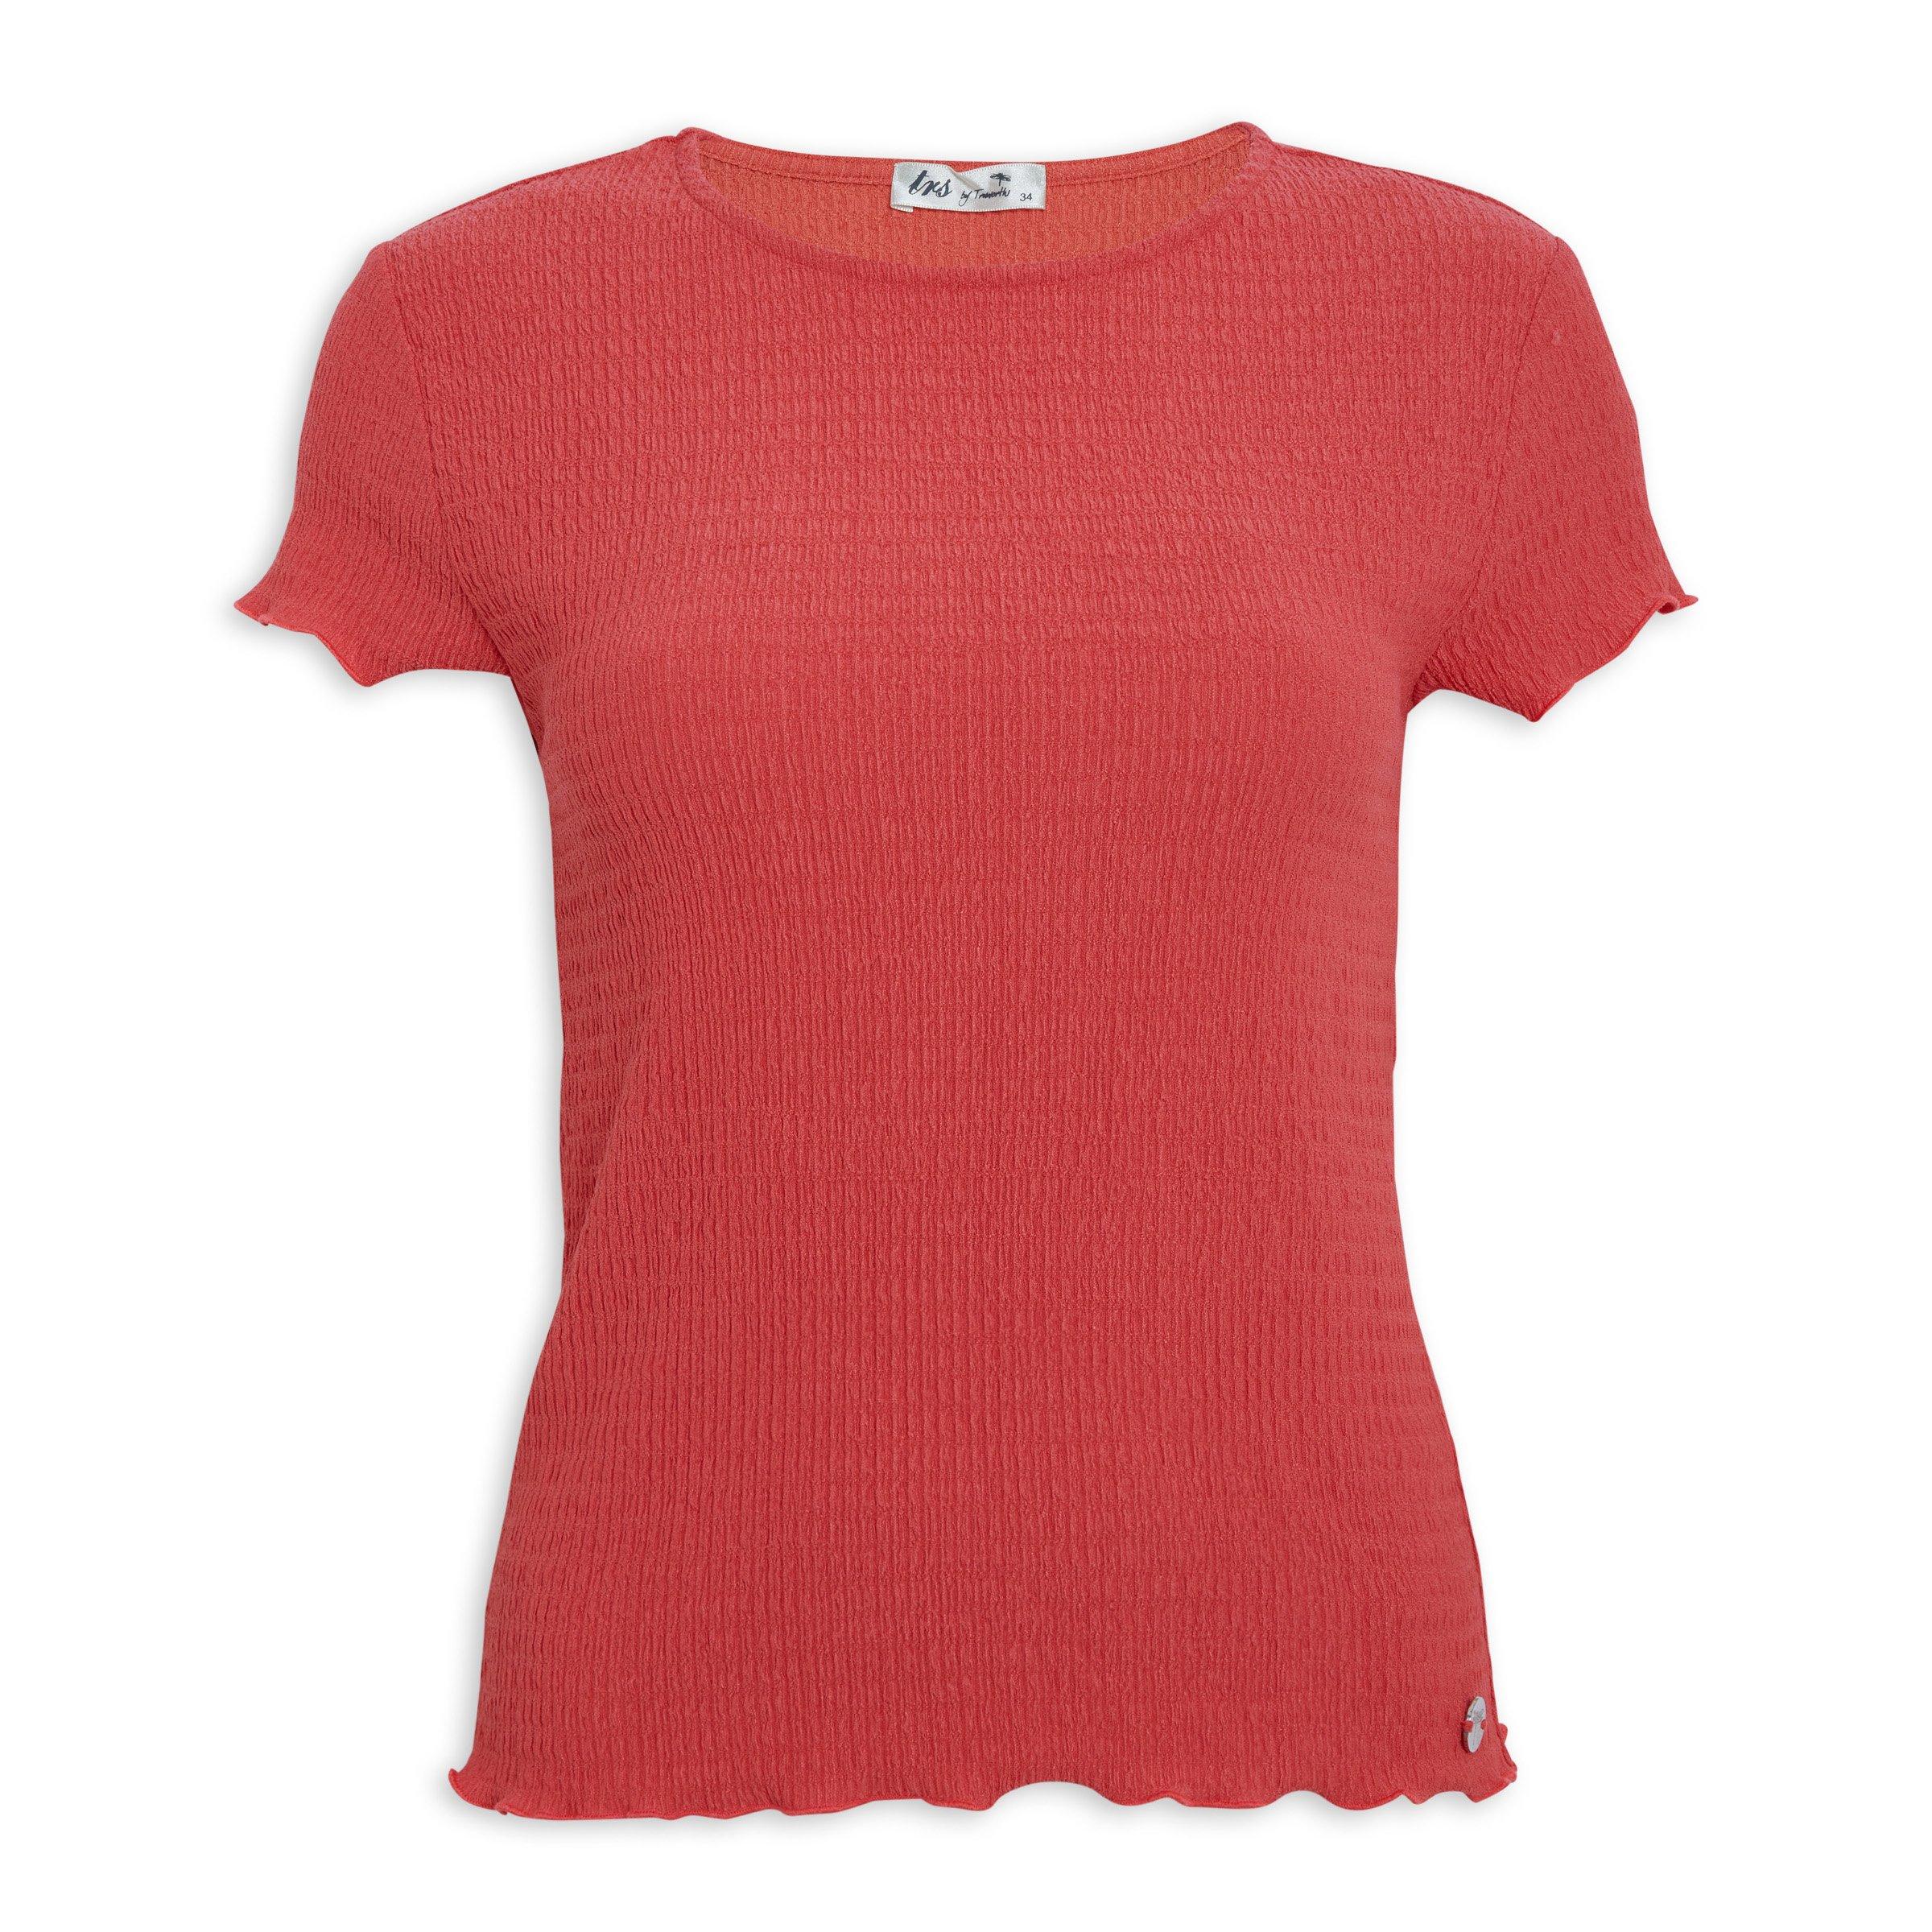 Coral Peplum Fitted Tee